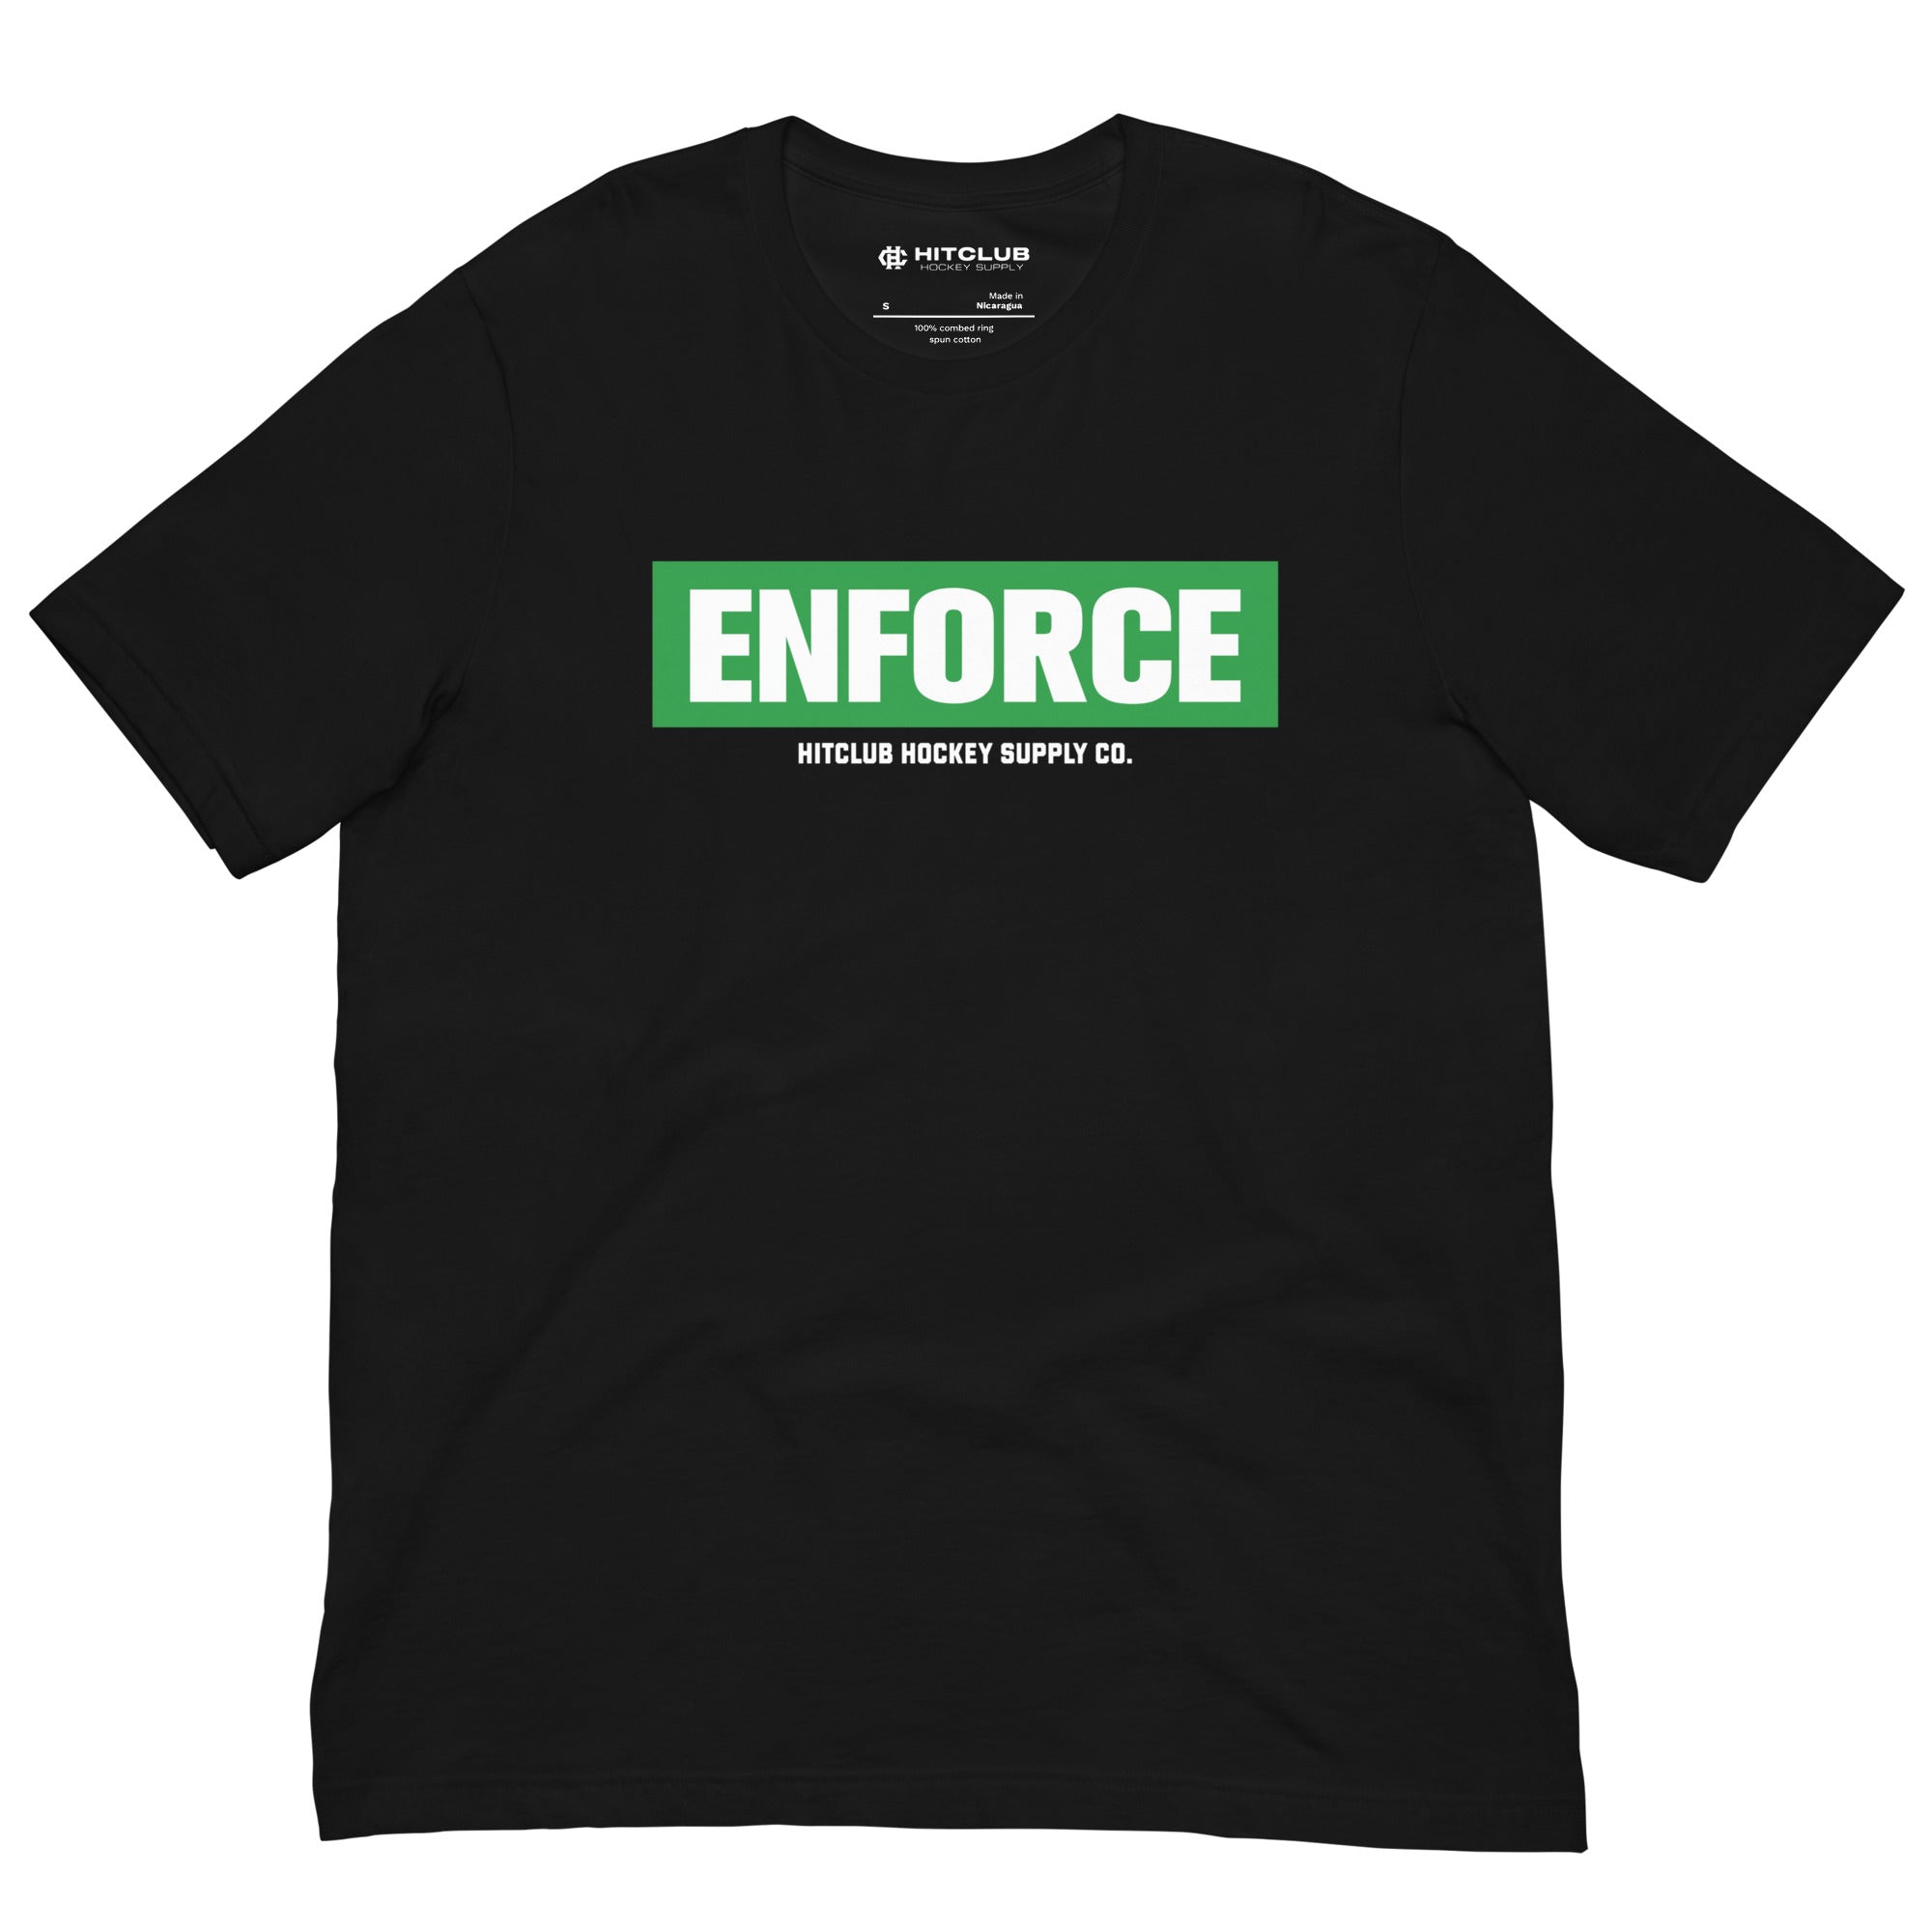 Enforce – Limited Edition – Tee